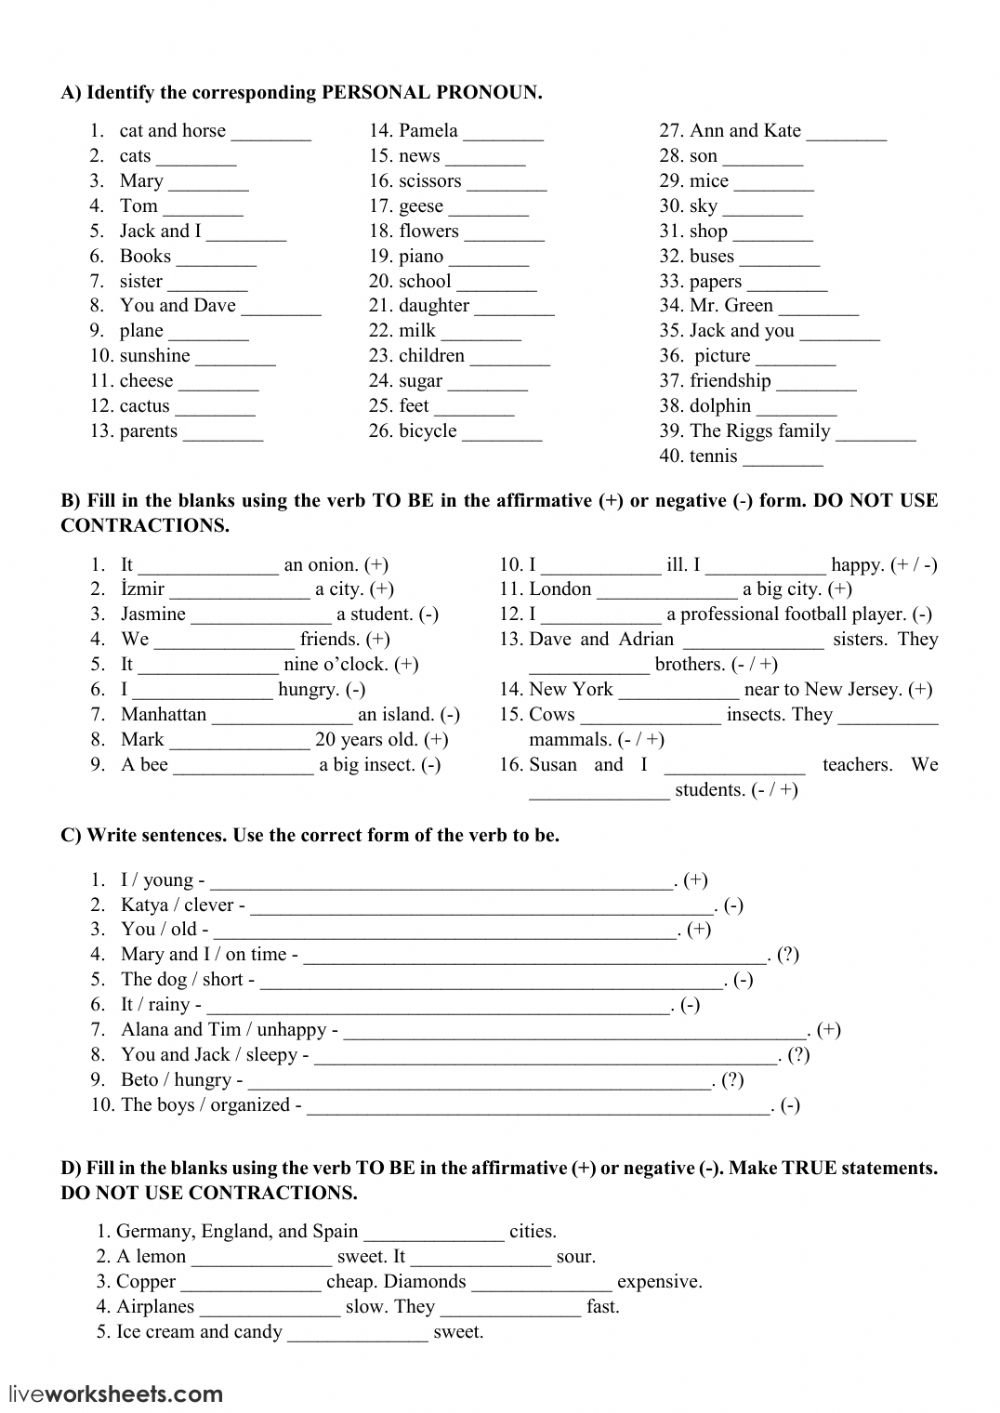 subject-pronouns-and-verb-to-be-interactive-worksheet-inside-subject-pronouns-worksheet-1